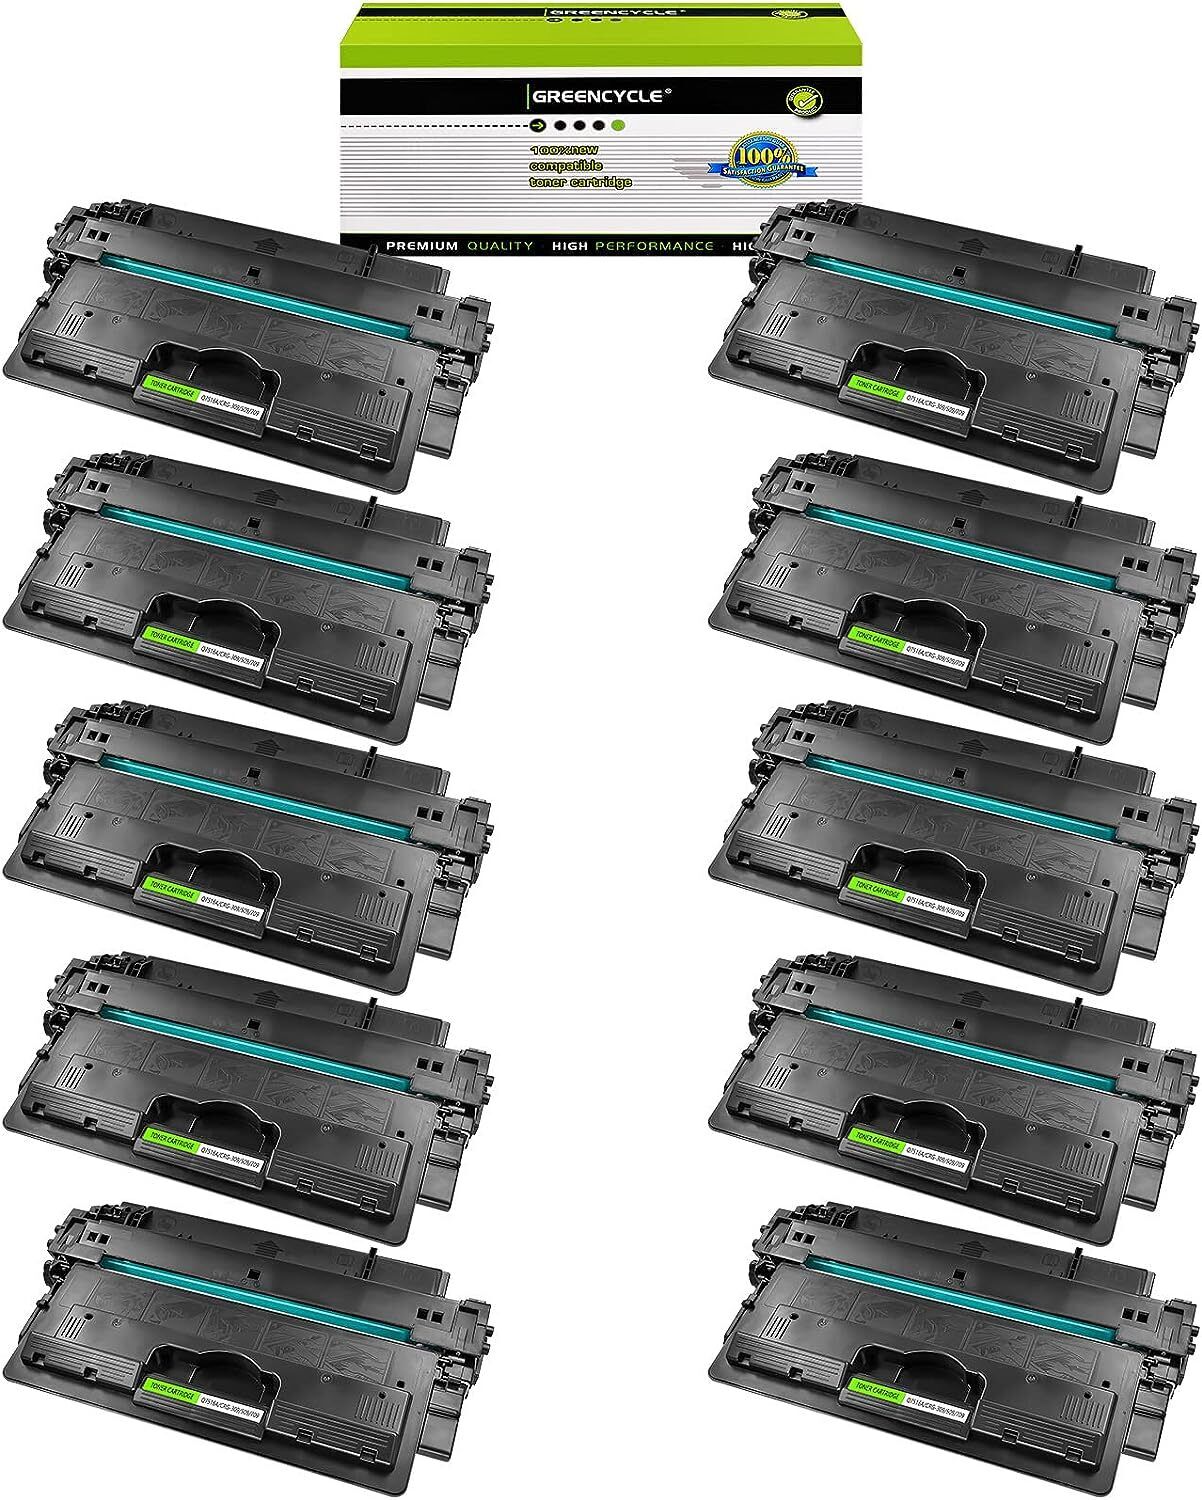 10PK Greencycle High Yield Toner 16A Q7516A Compatible for HP LaserJet 5200TN